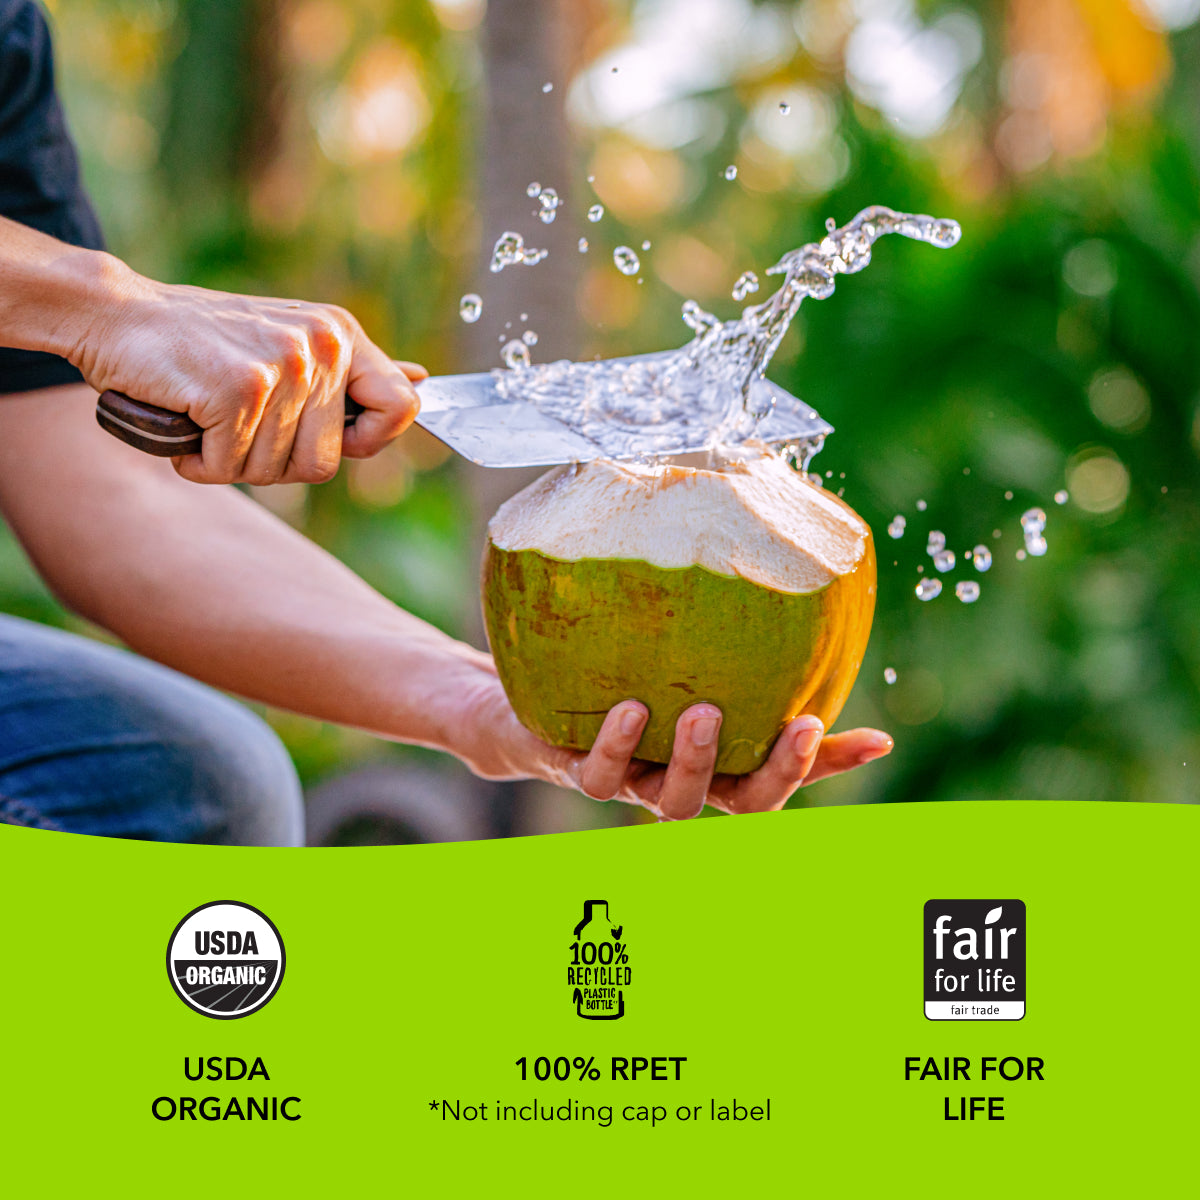 https://cdn.shopify.com/s/files/1/0417/4764/4577/files/5_-_Coconut_Water_Pink_Lady_Apple_Sustainability.jpg?v=1696486679